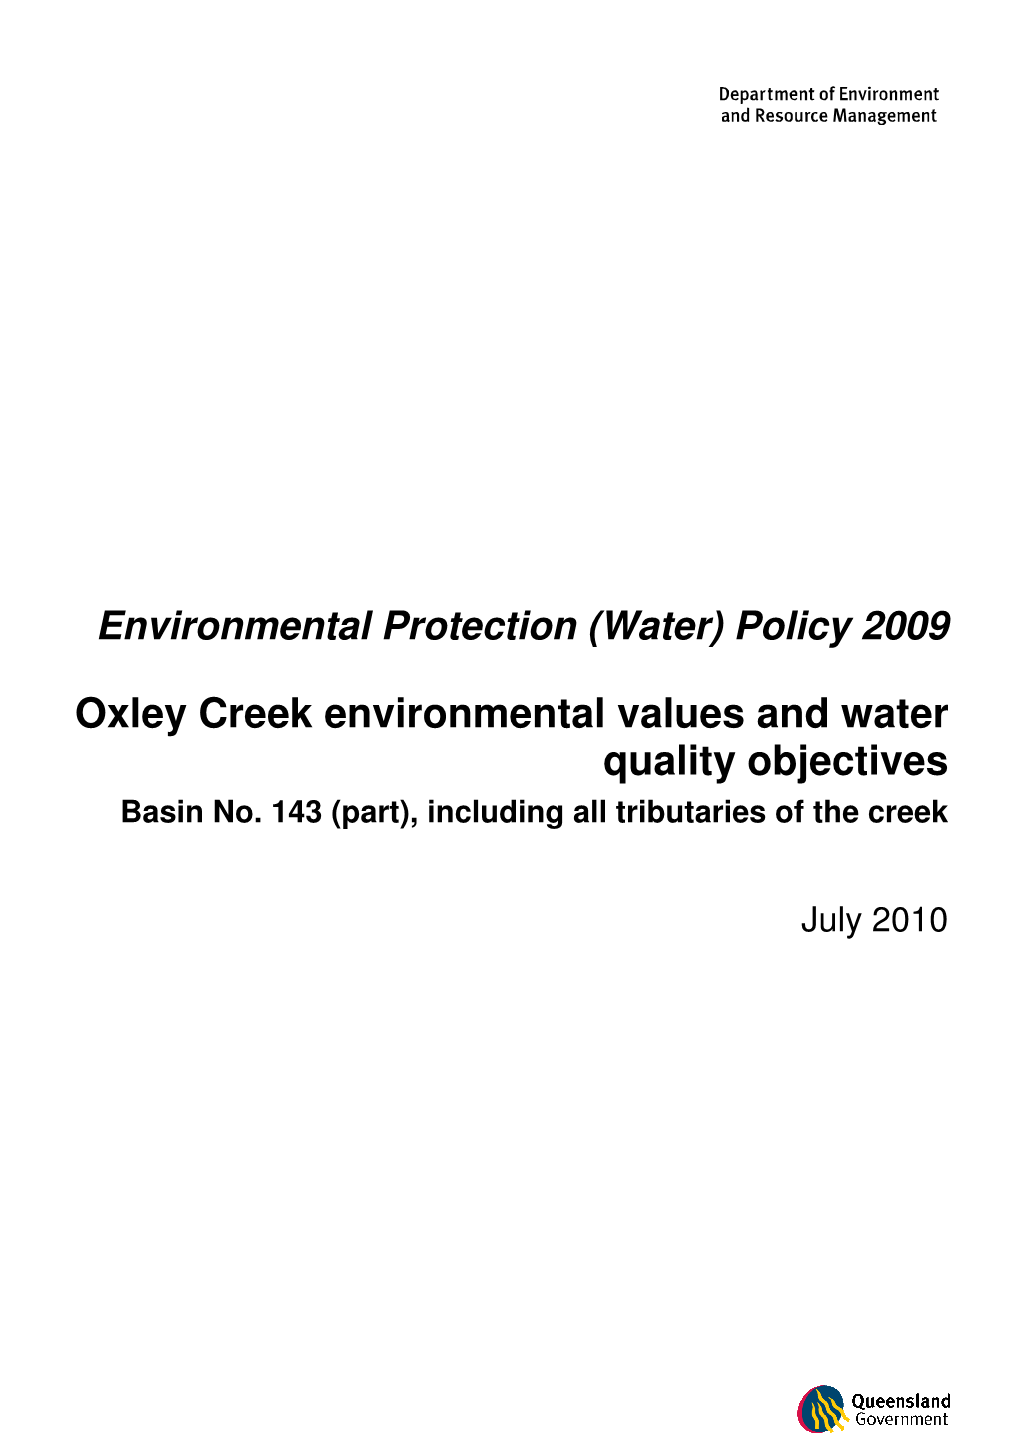 Oxley Creek Environmental Values and Water Quality Objectives Basin No